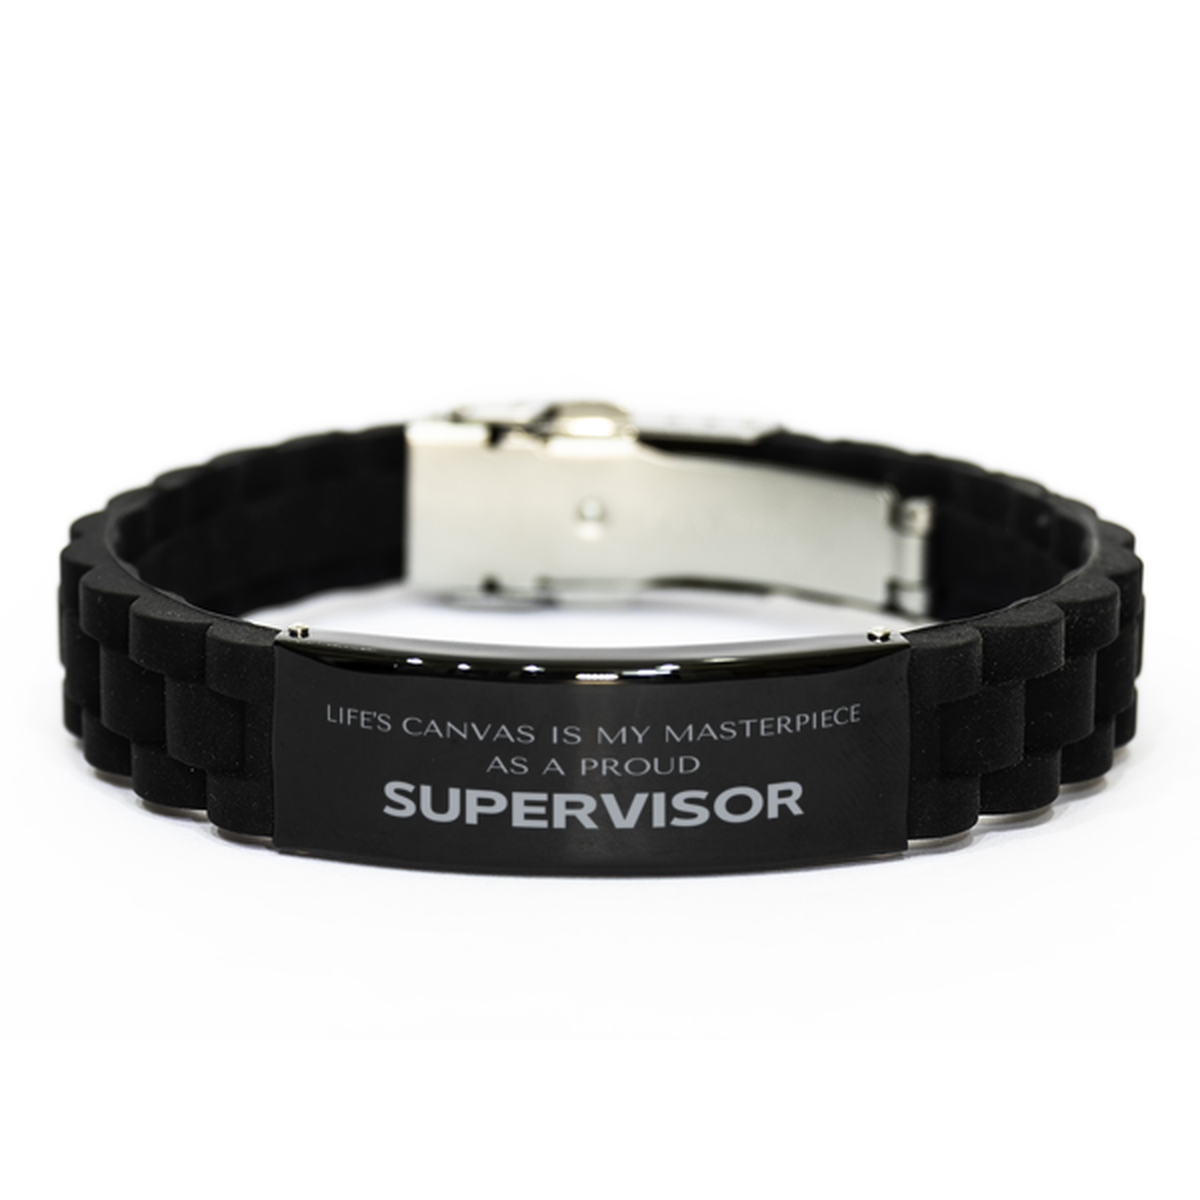 Proud Supervisor Gifts, Life's canvas is my masterpiece, Epic Birthday Christmas Unique Black Glidelock Clasp Bracelet For Supervisor, Coworkers, Men, Women, Friends